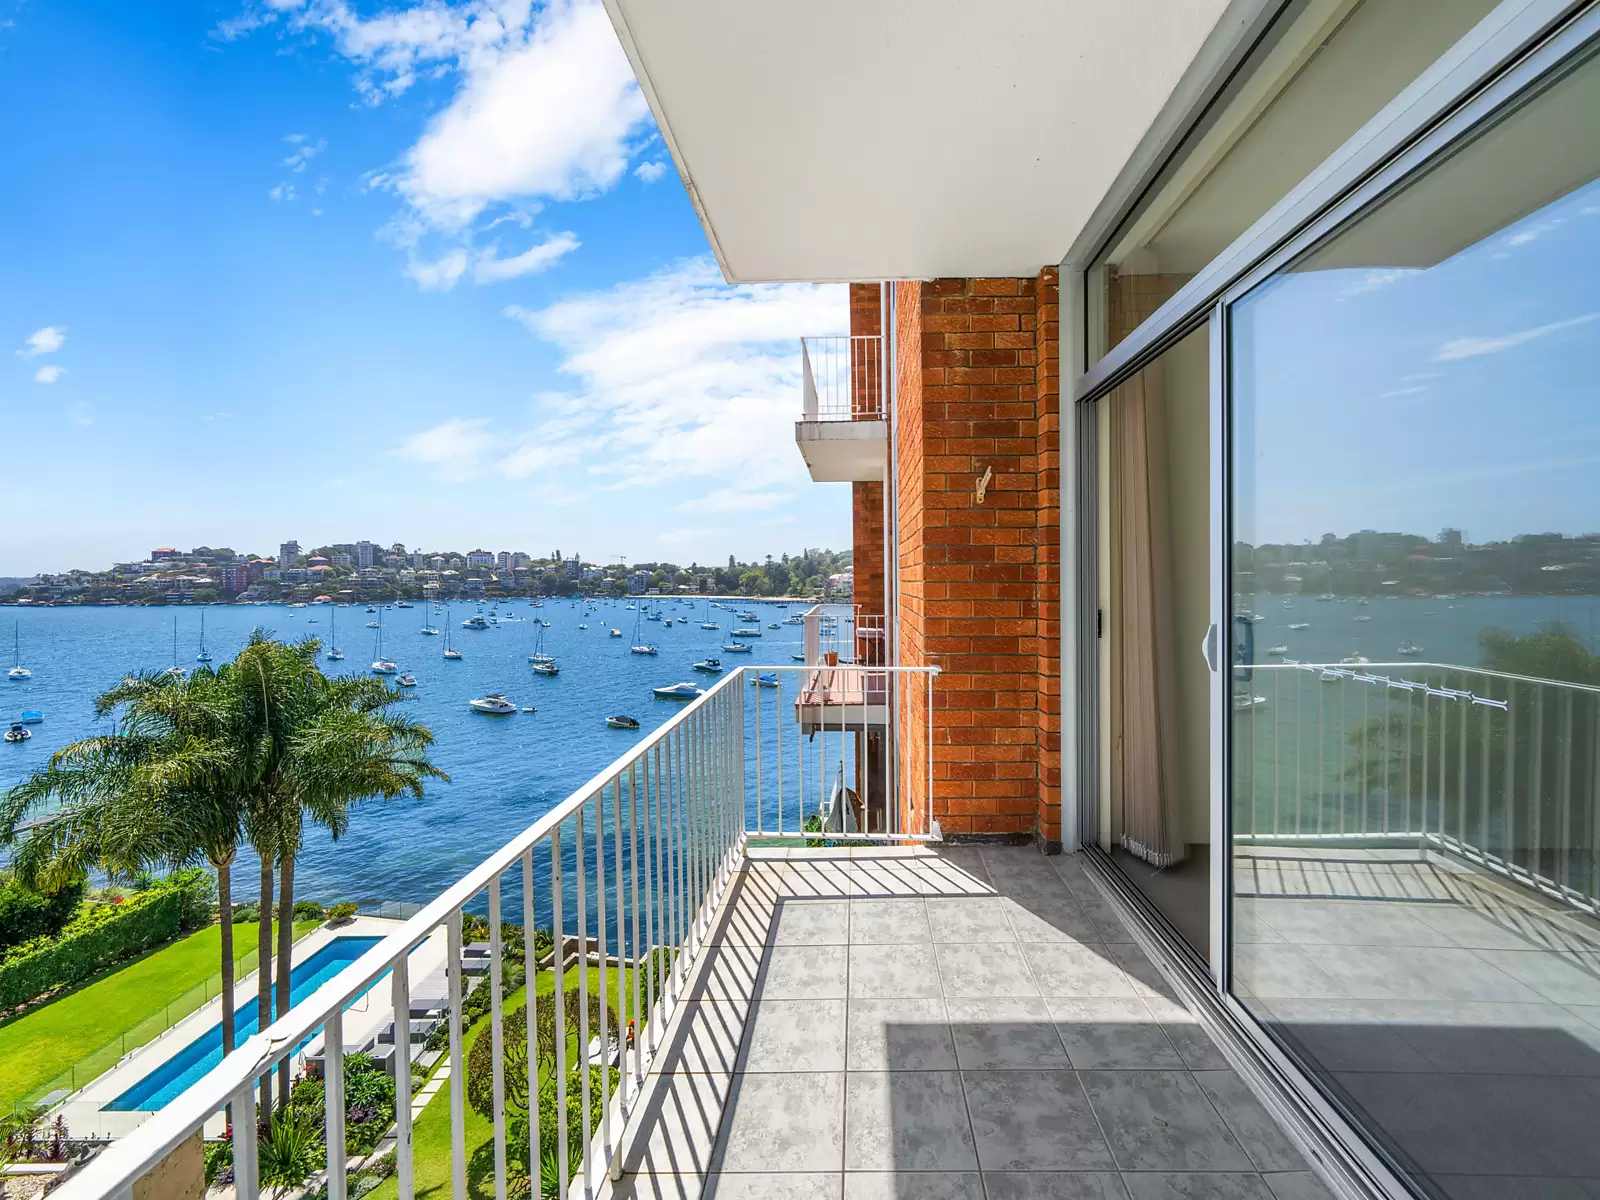 Photo #13: 65/35A Sutherland Crescent, Darling Point - Auction by Sydney Sotheby's International Realty